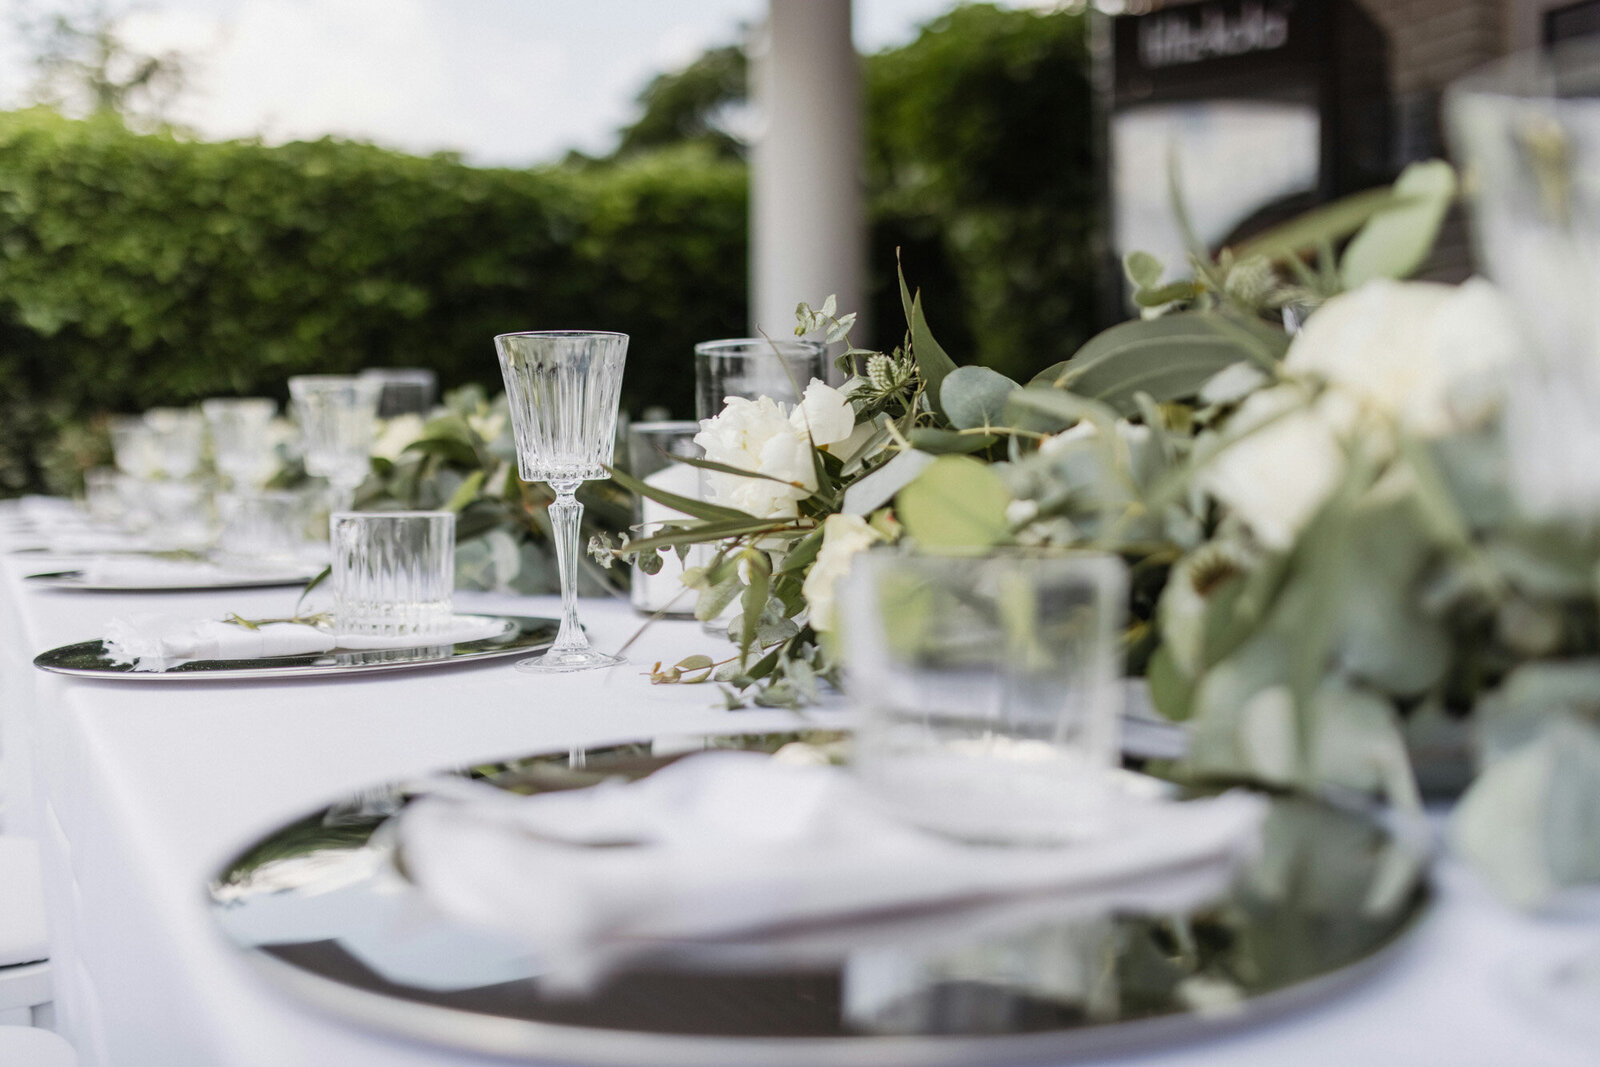 Wedding reception table with dinnerwares, glasses and floral details